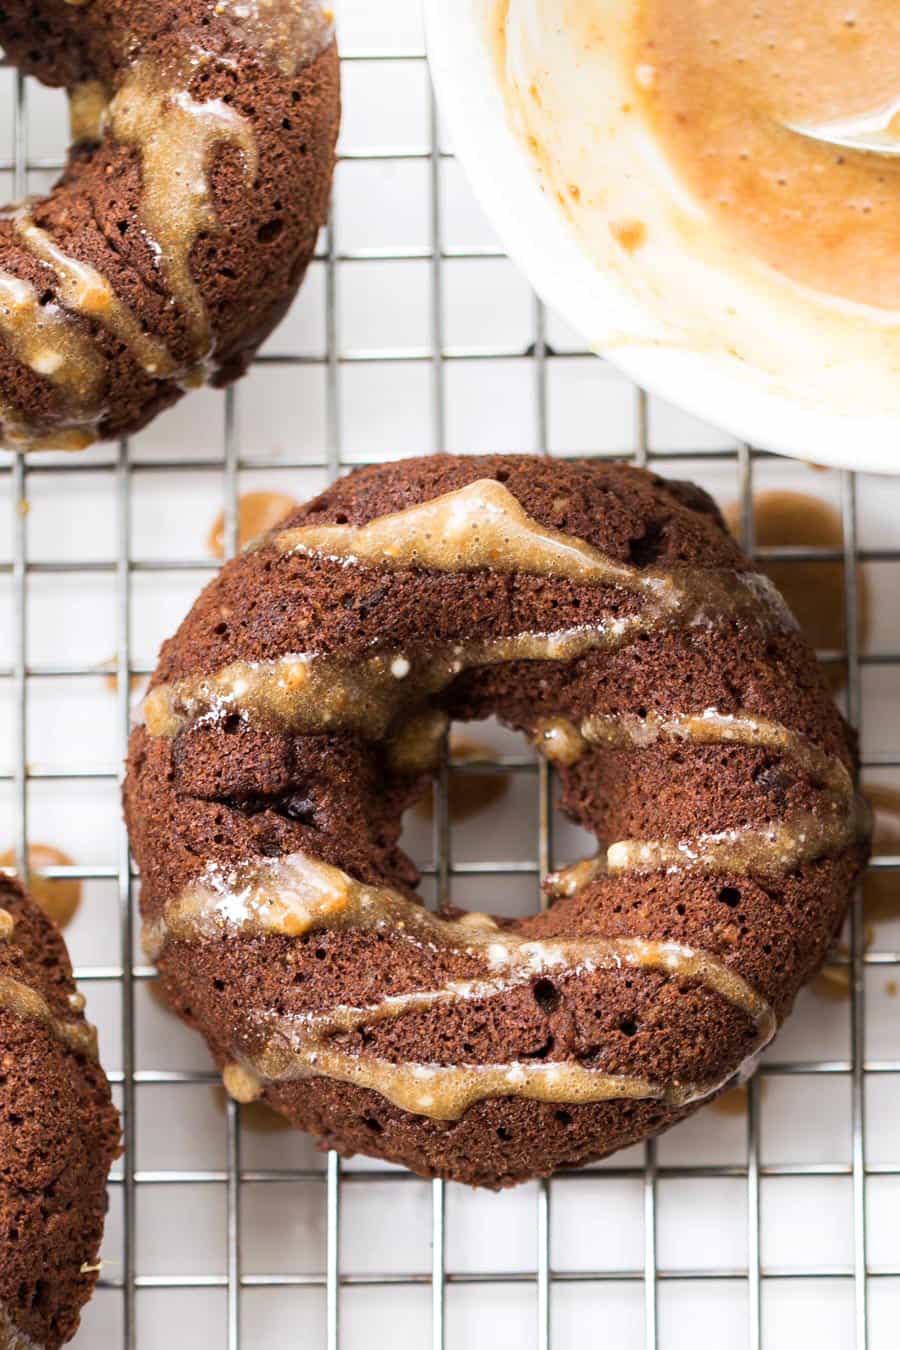 Banana Chocolate BLENDER Donuts! made with healthy ingredients, ready in just 15 minutes and seriously delicious! [vegan]